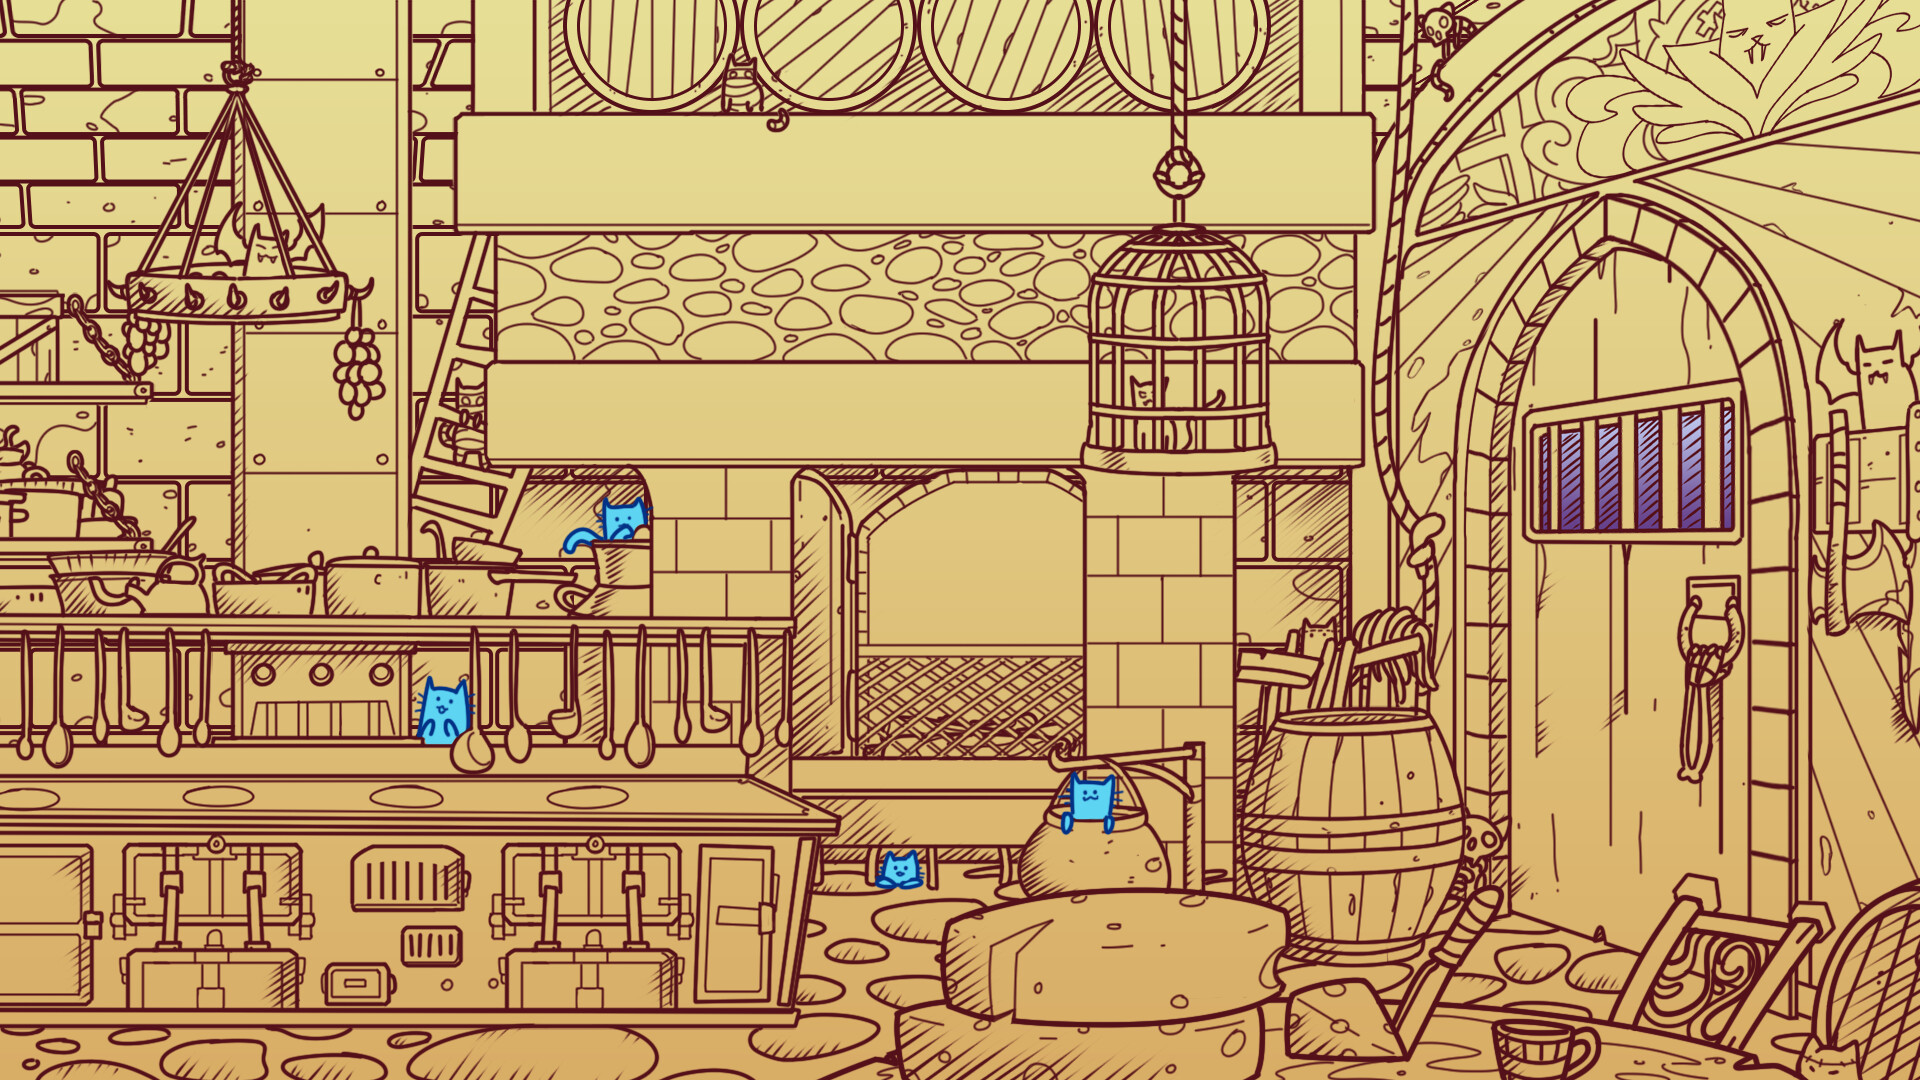 A Castle Full of Cats on Steam